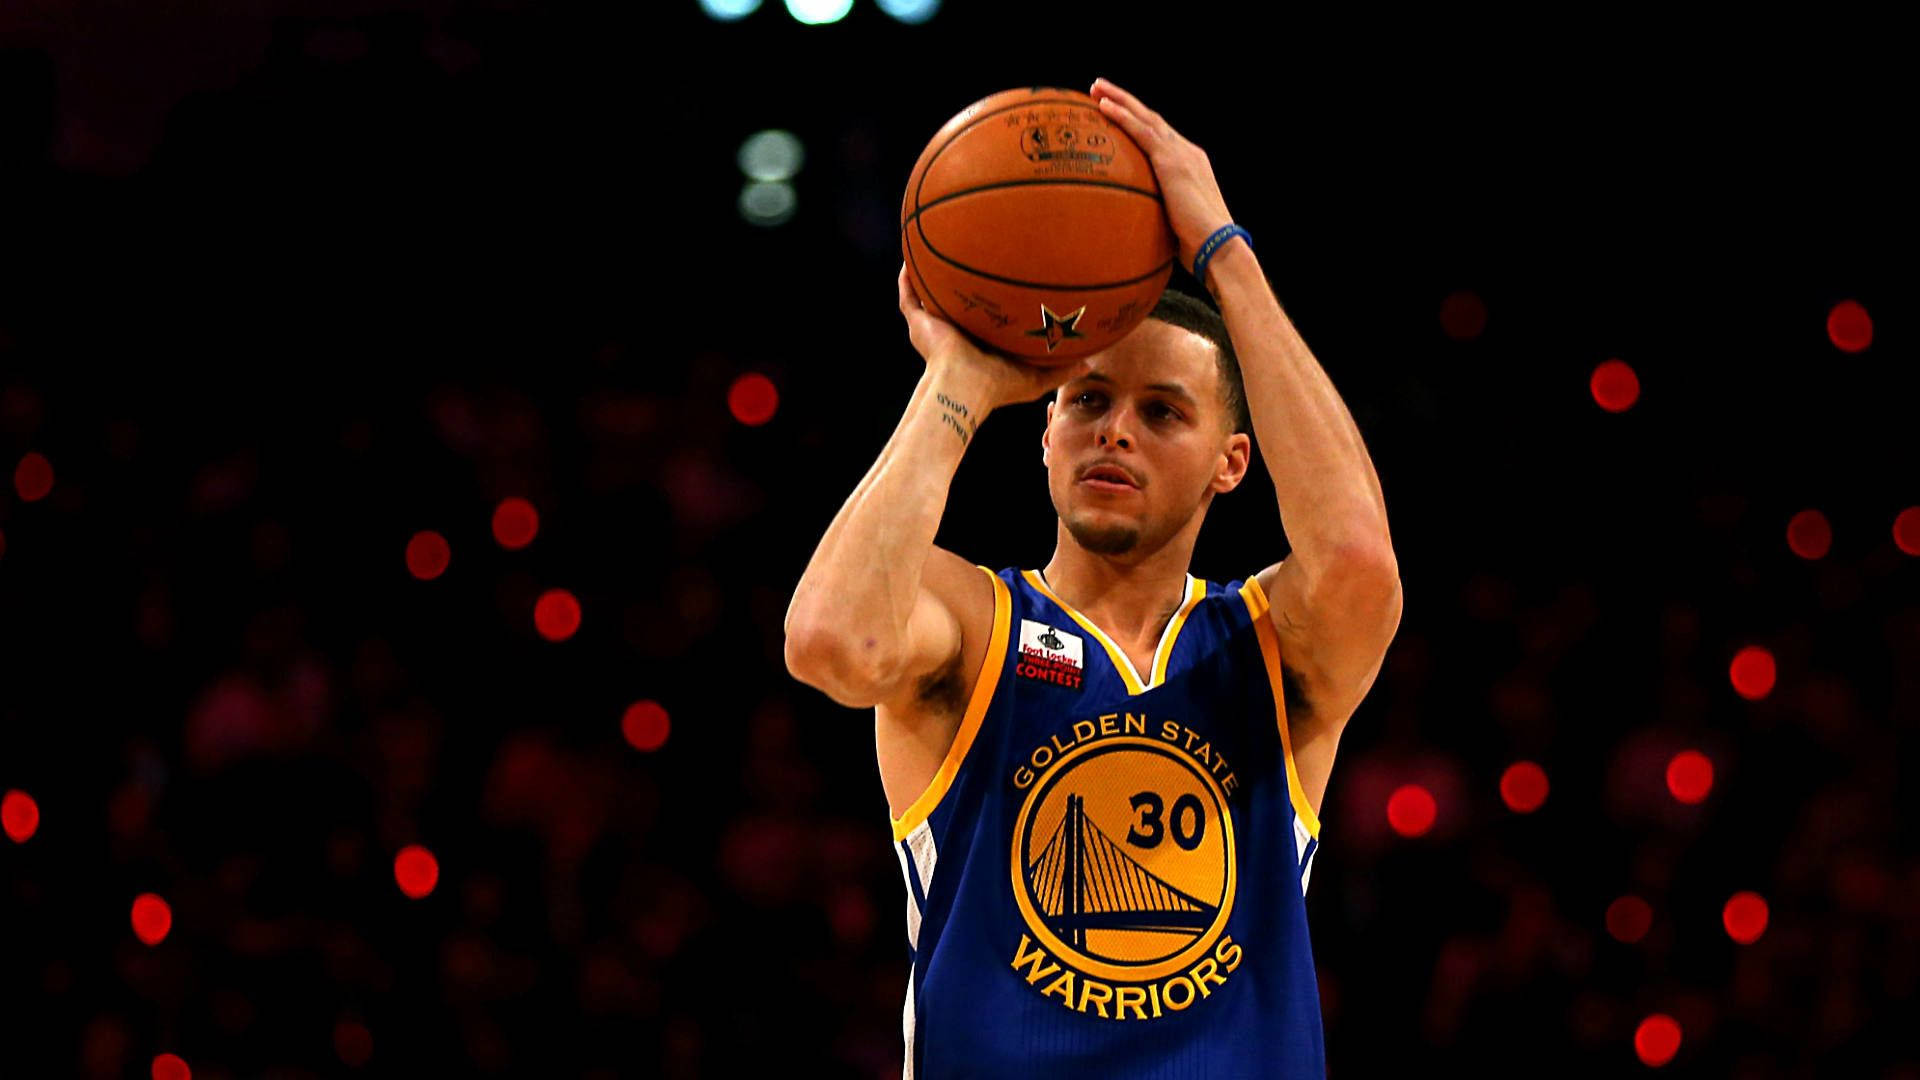 Shooting Stephen Curry In Dark Background